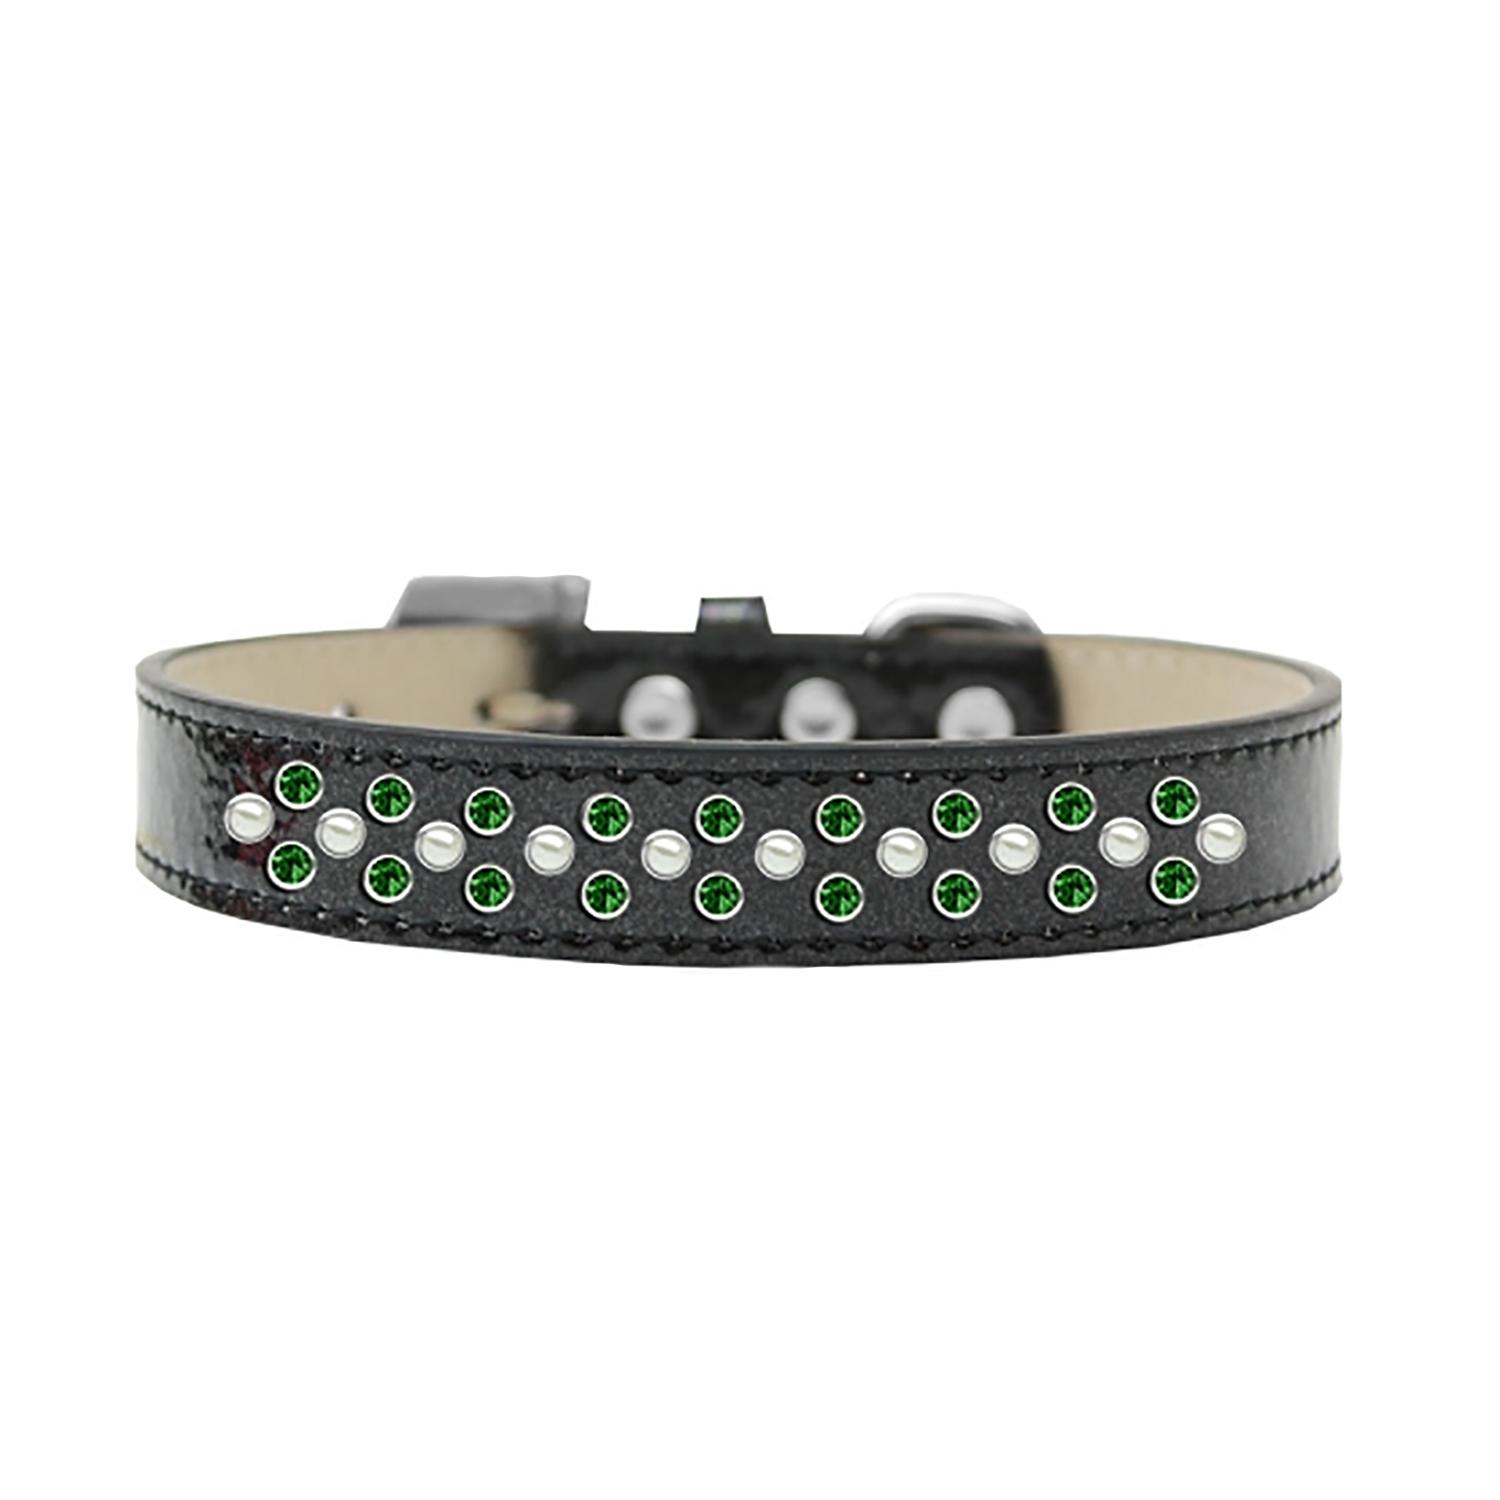 Sprinkles Ice Cream Dog Collar - Pearl and Green Crystals on Black